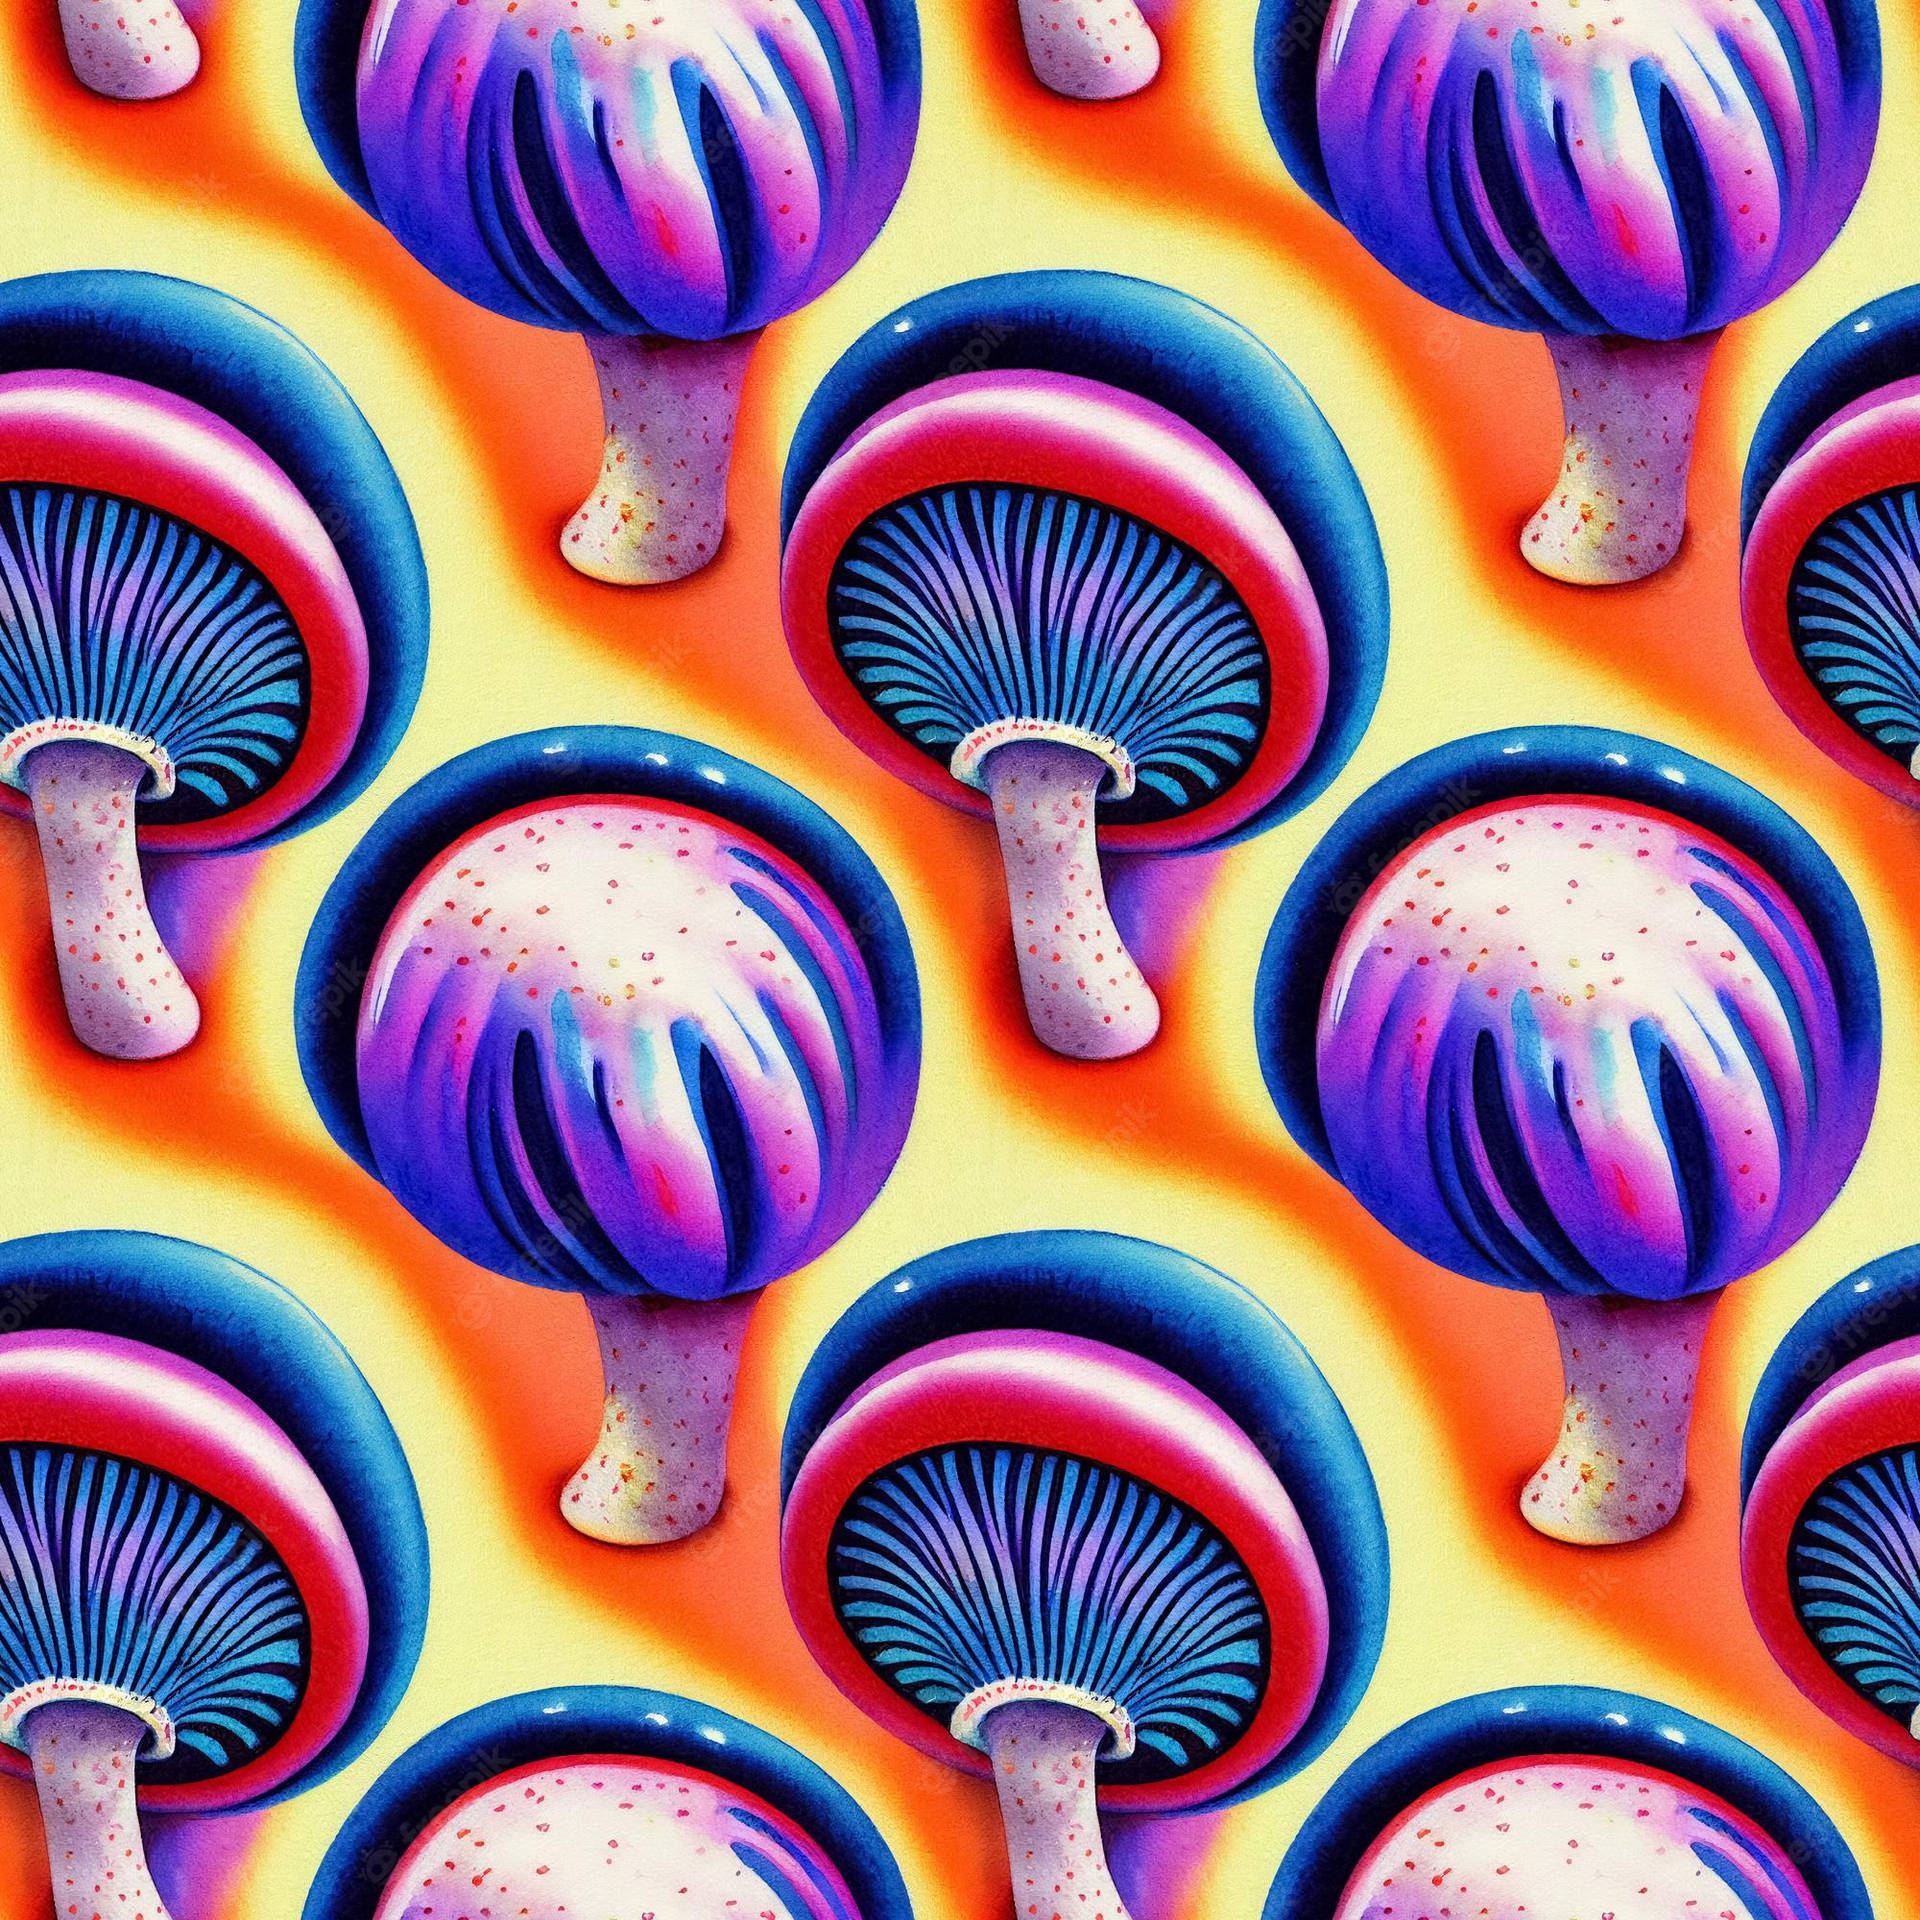 A Colorful Pattern Of Mushrooms On A Yellow Background Wallpaper